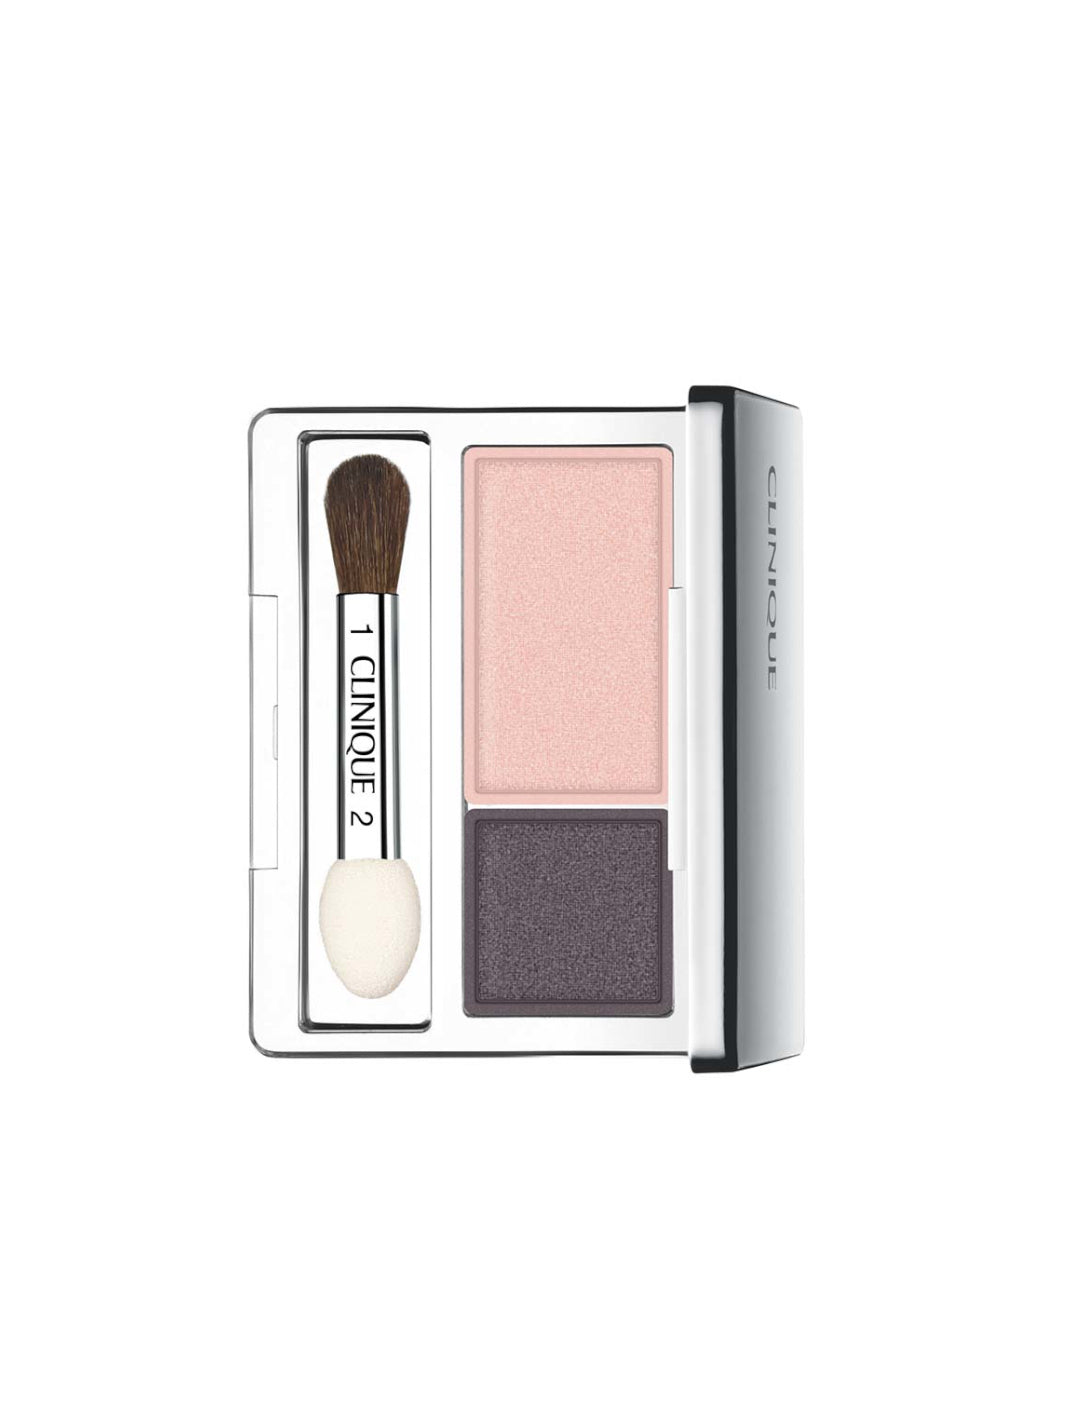 Clinique All About shadow duo - ombretti 